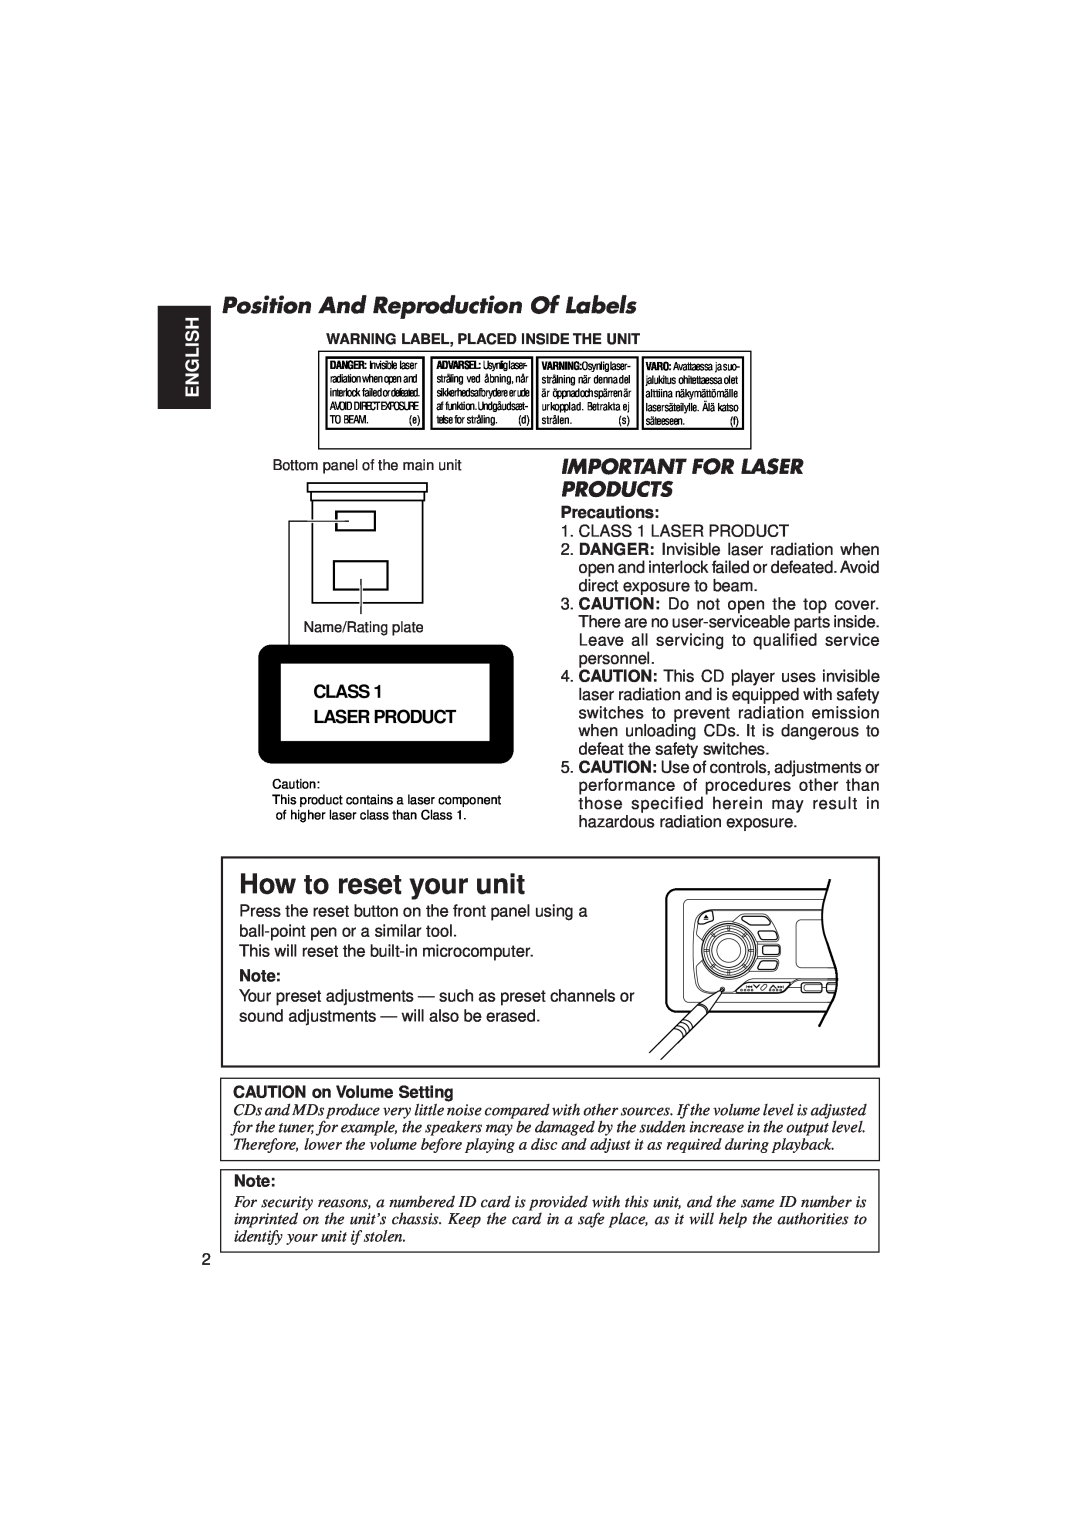 JVC KD-MX2900R manual How to reset your unit, Important For Laser Products, English, Class Laser Product, Precautions 